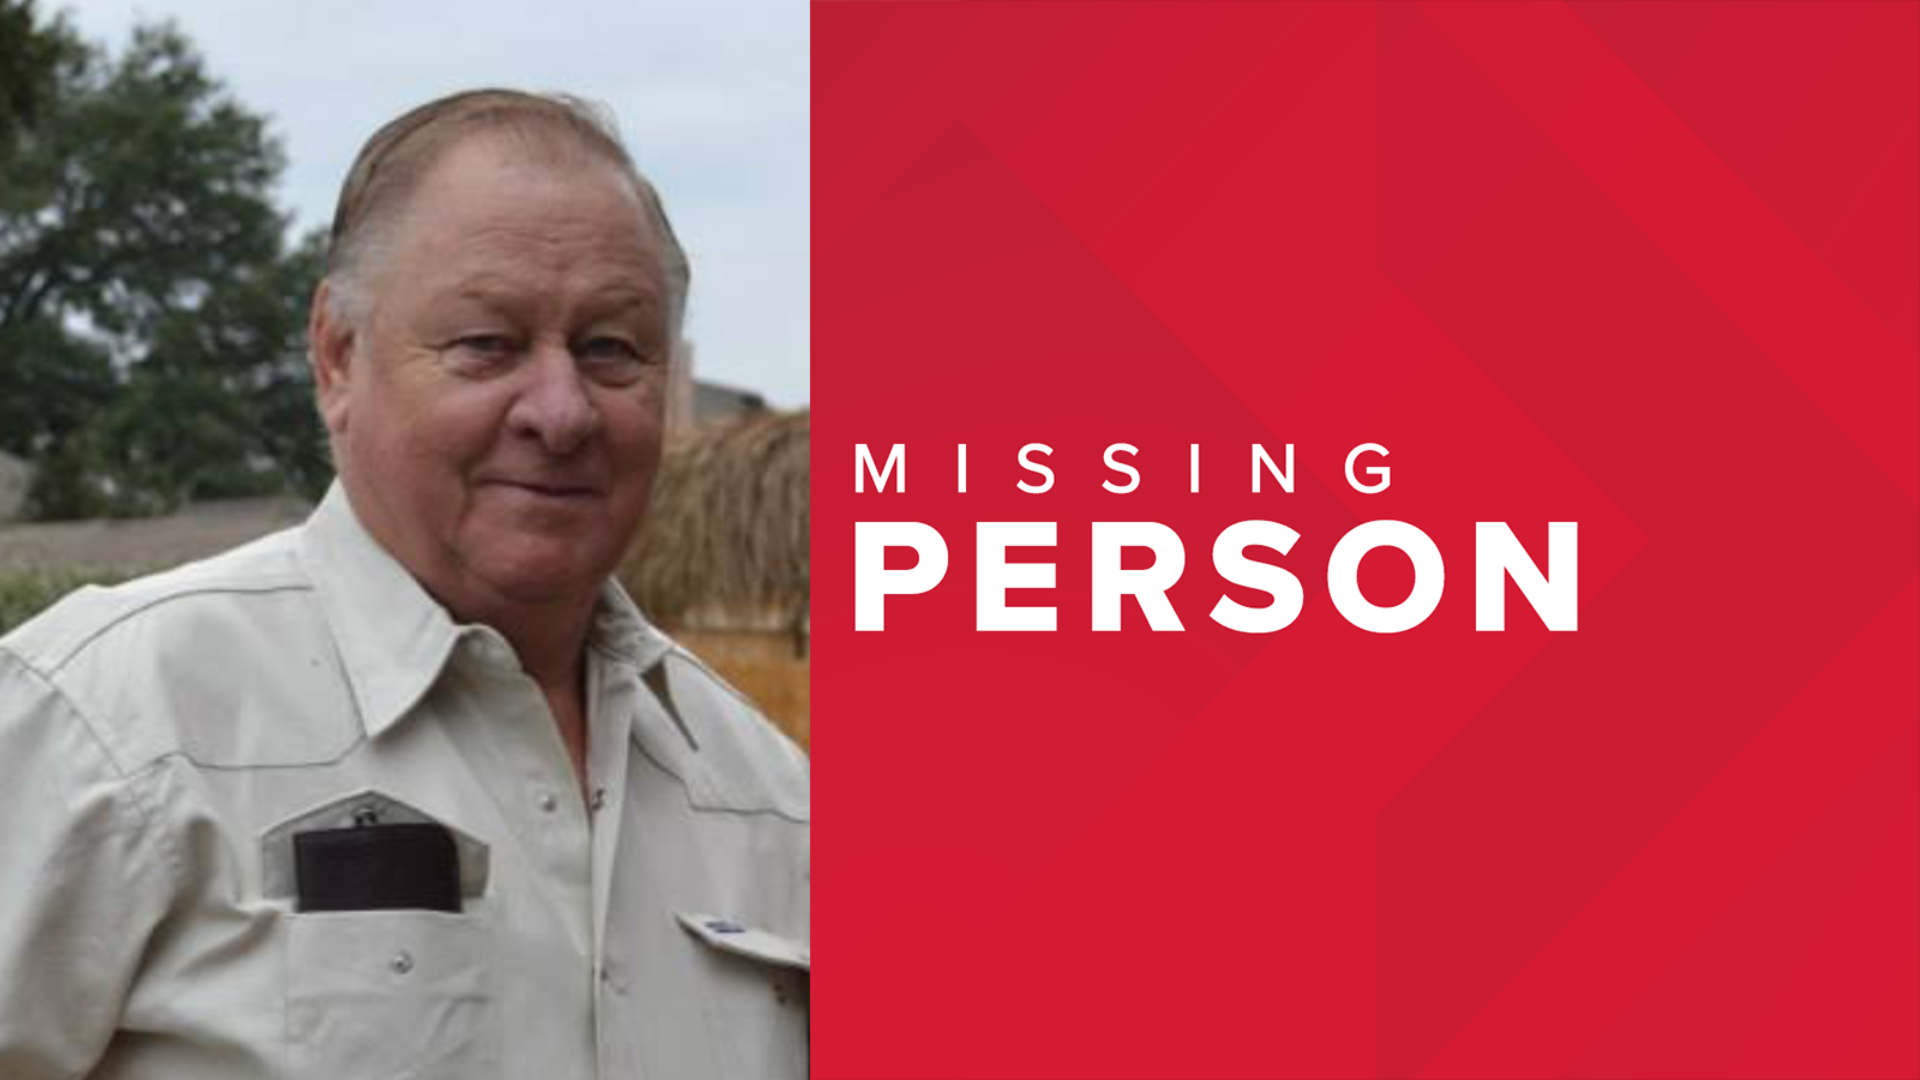 An Ector County man, with dementia, was last seen by his neighbor on Saturday.